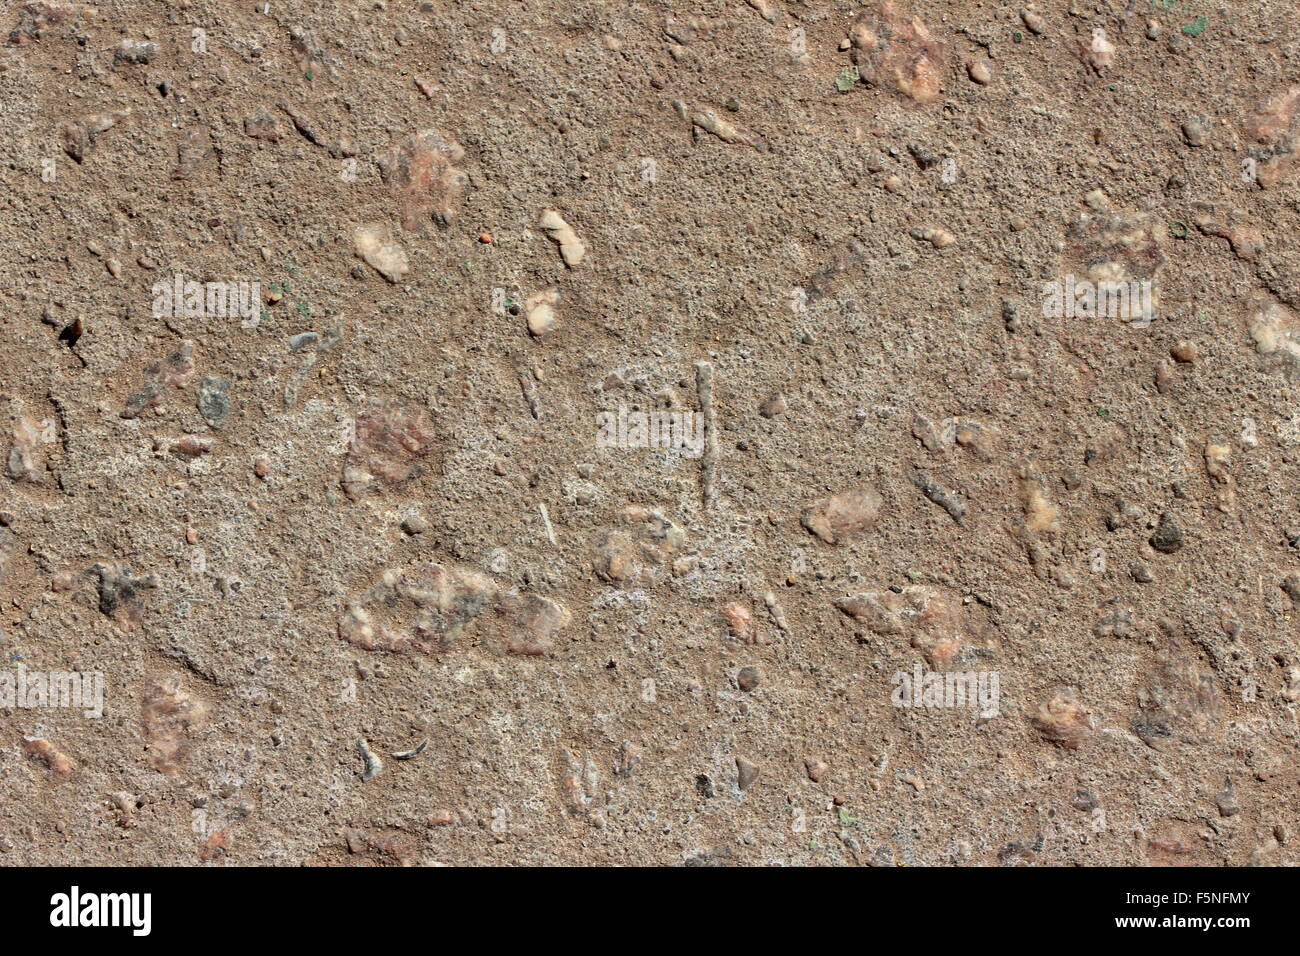 close up texture of old concrete slab Stock Photo